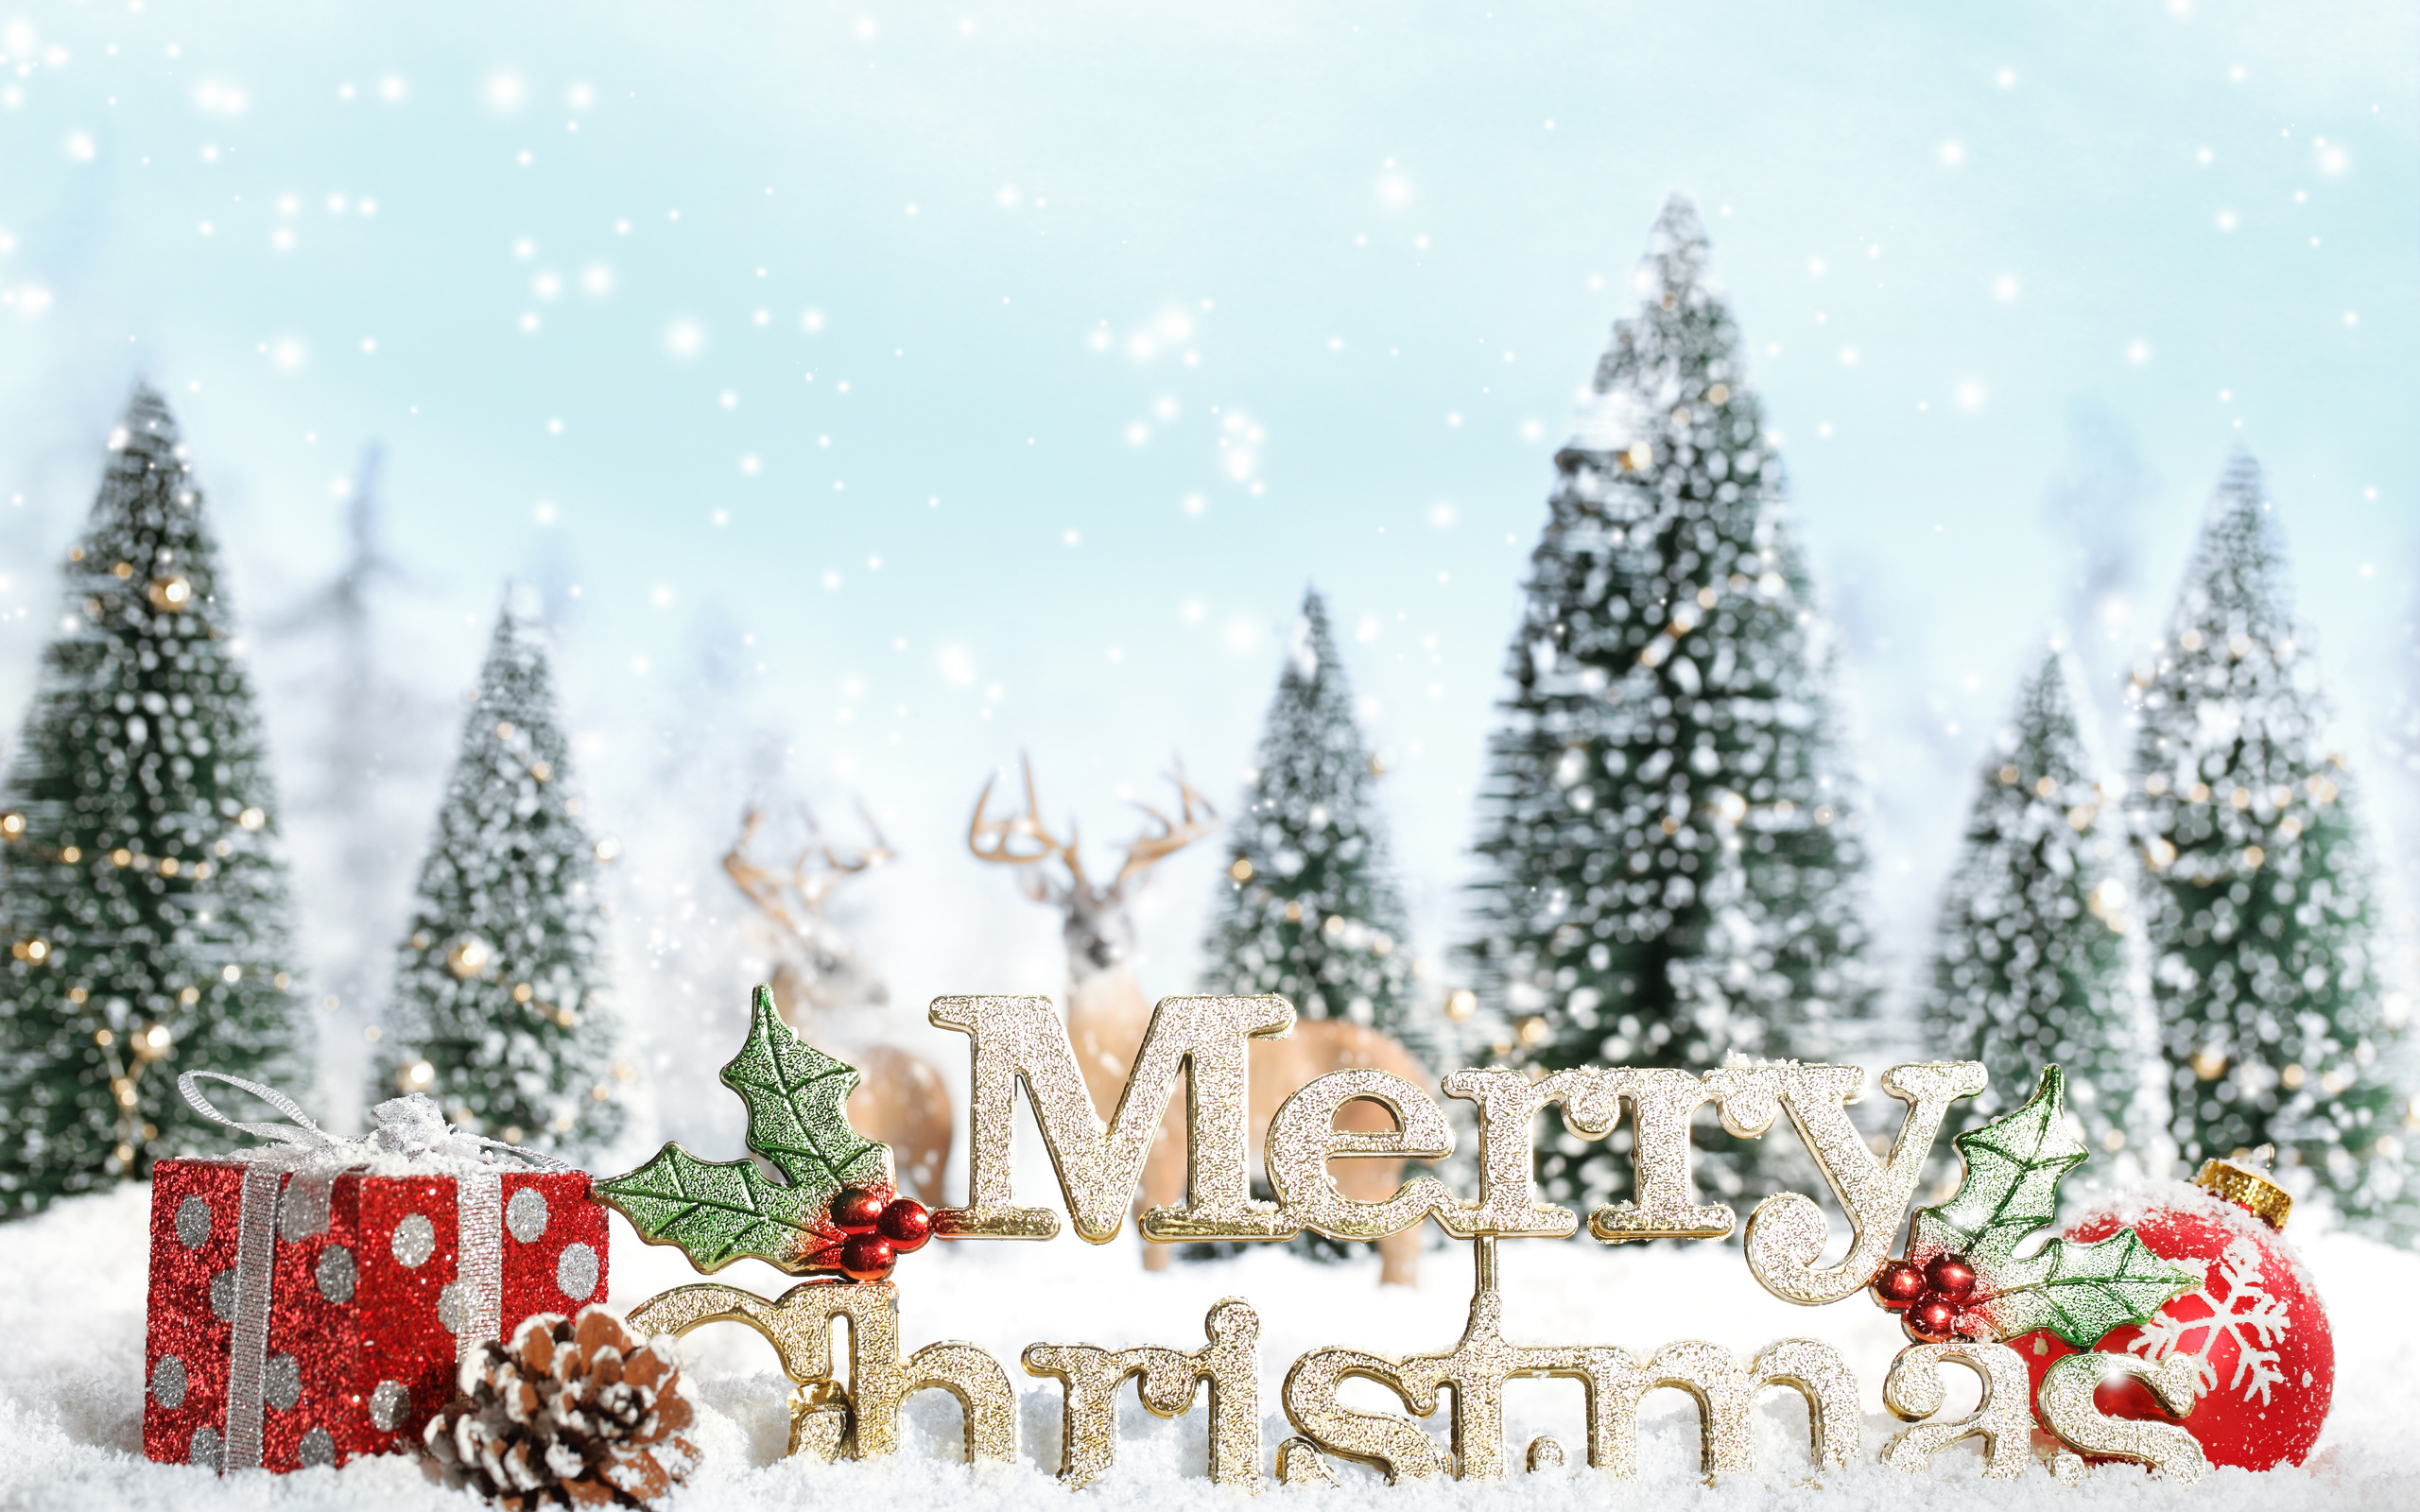 Merry Christmas Tree Wallpaper Background Apps For Pc Pla